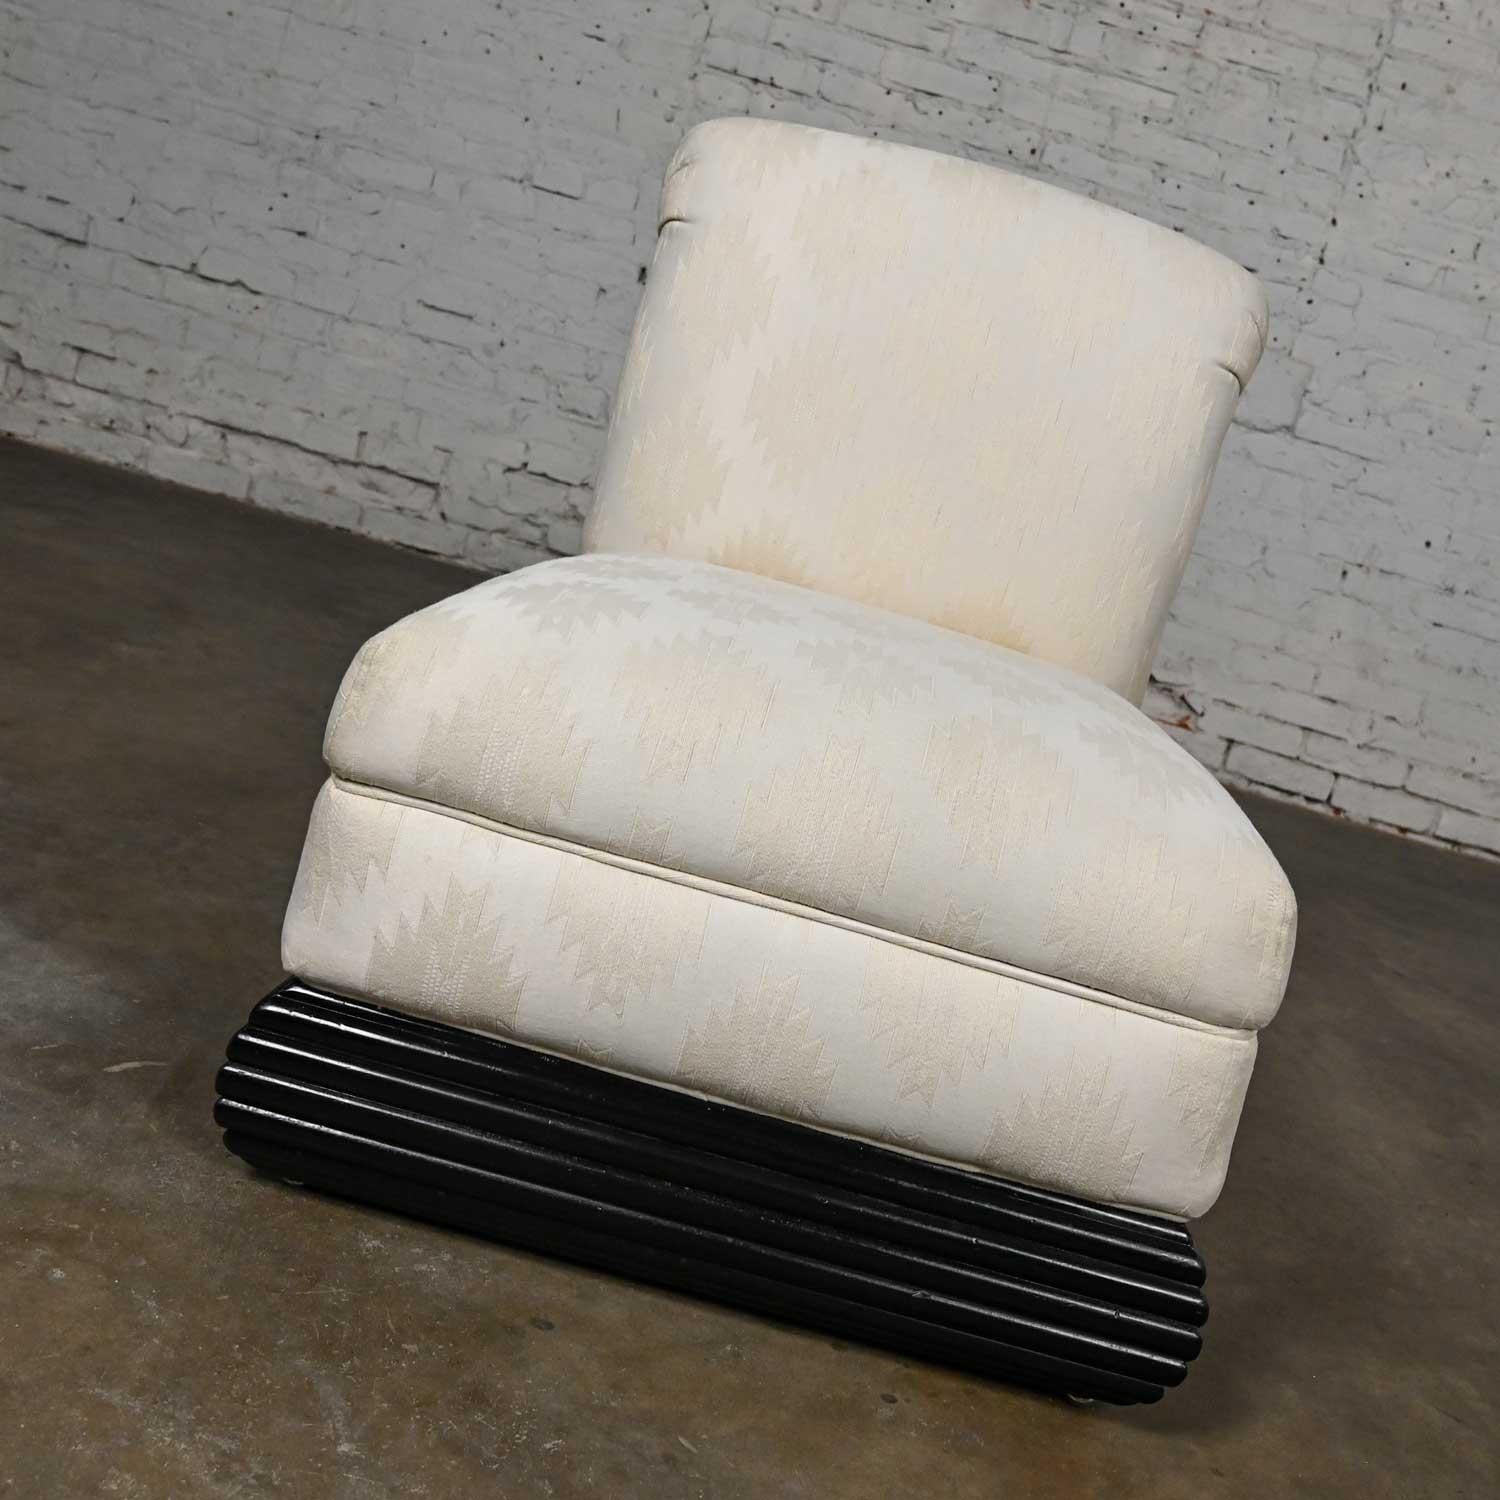 Lovely vintage Art Deco Revival white slipper chair with a rolled back and black ribbed wood base. Beautiful condition, keeping in mind that this is vintage and not new so will have signs of use and wear. The base has been freshly painted black. The